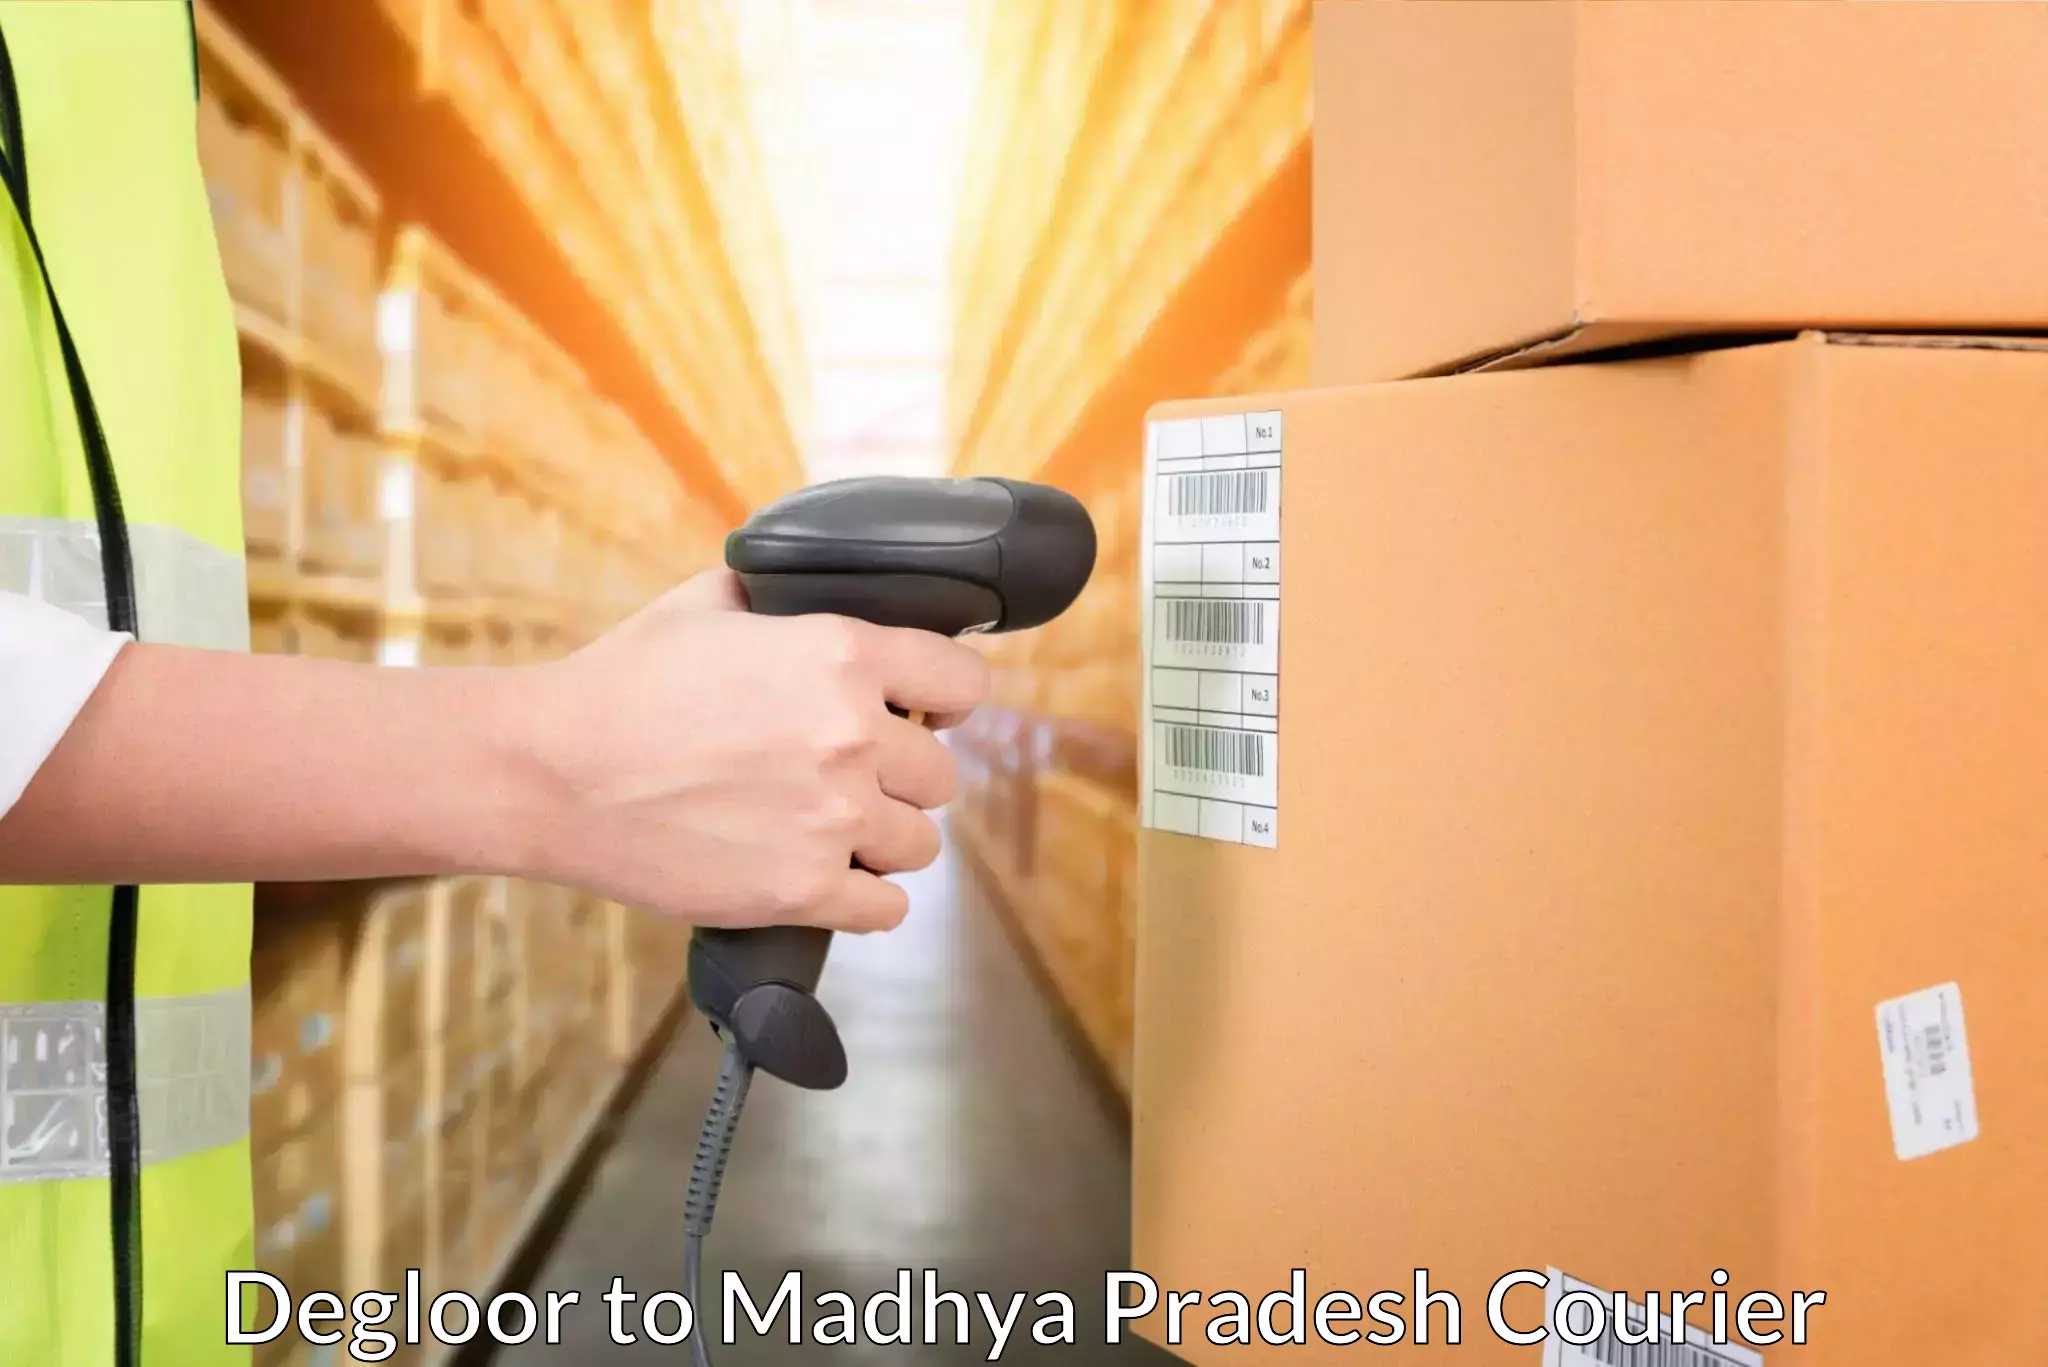 Courier service booking Degloor to IIIT Bhopal